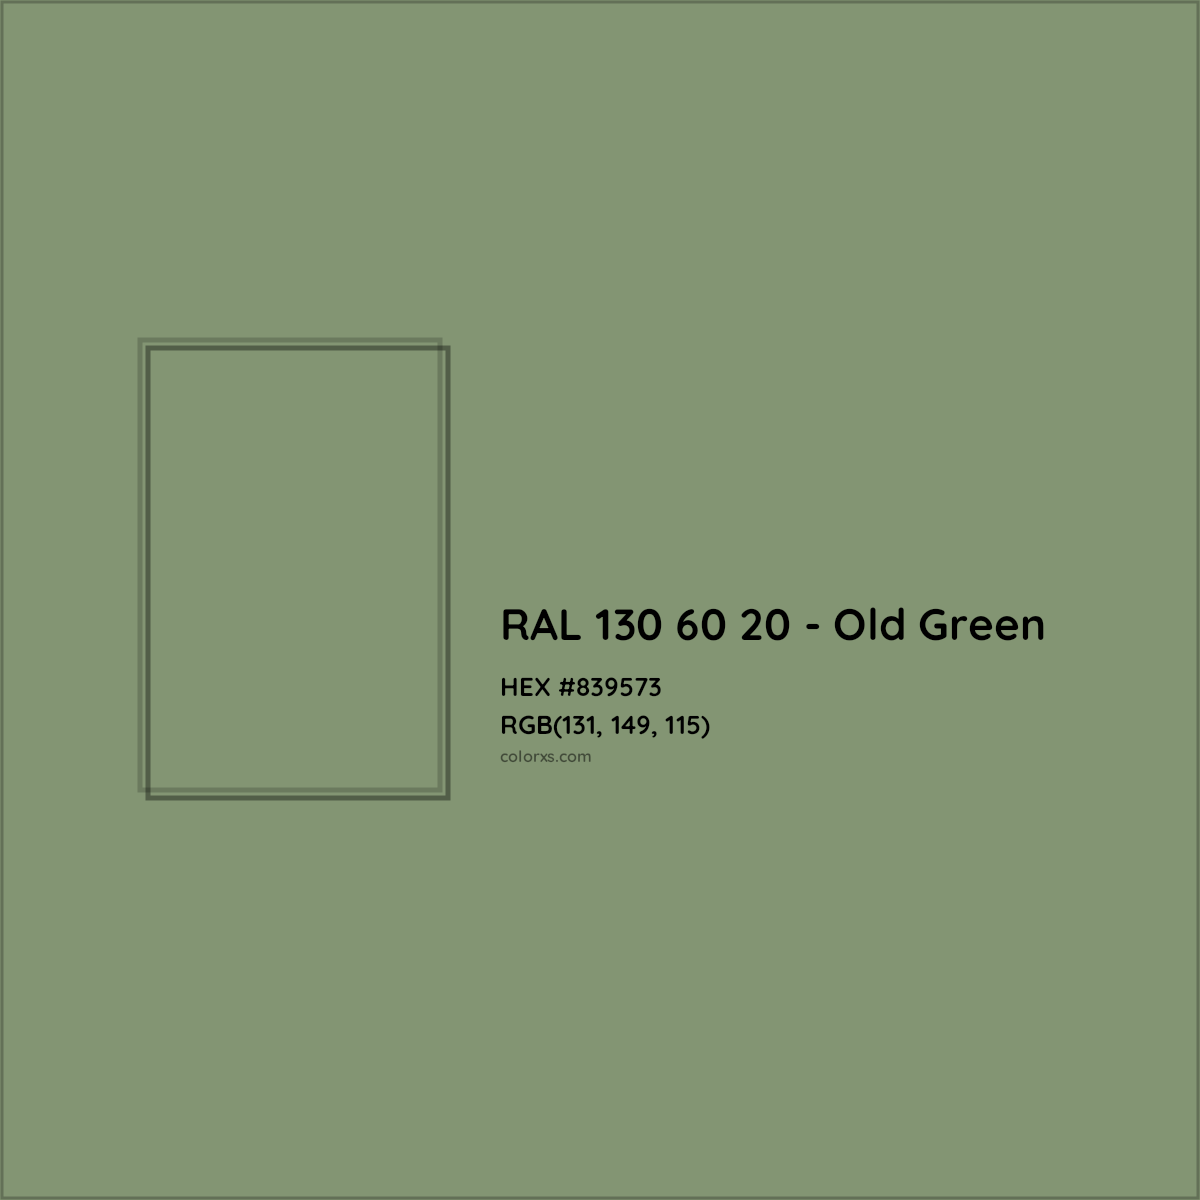 About RAL 130 60 20 - Old Green Color - Color codes, similar colors and  paints 